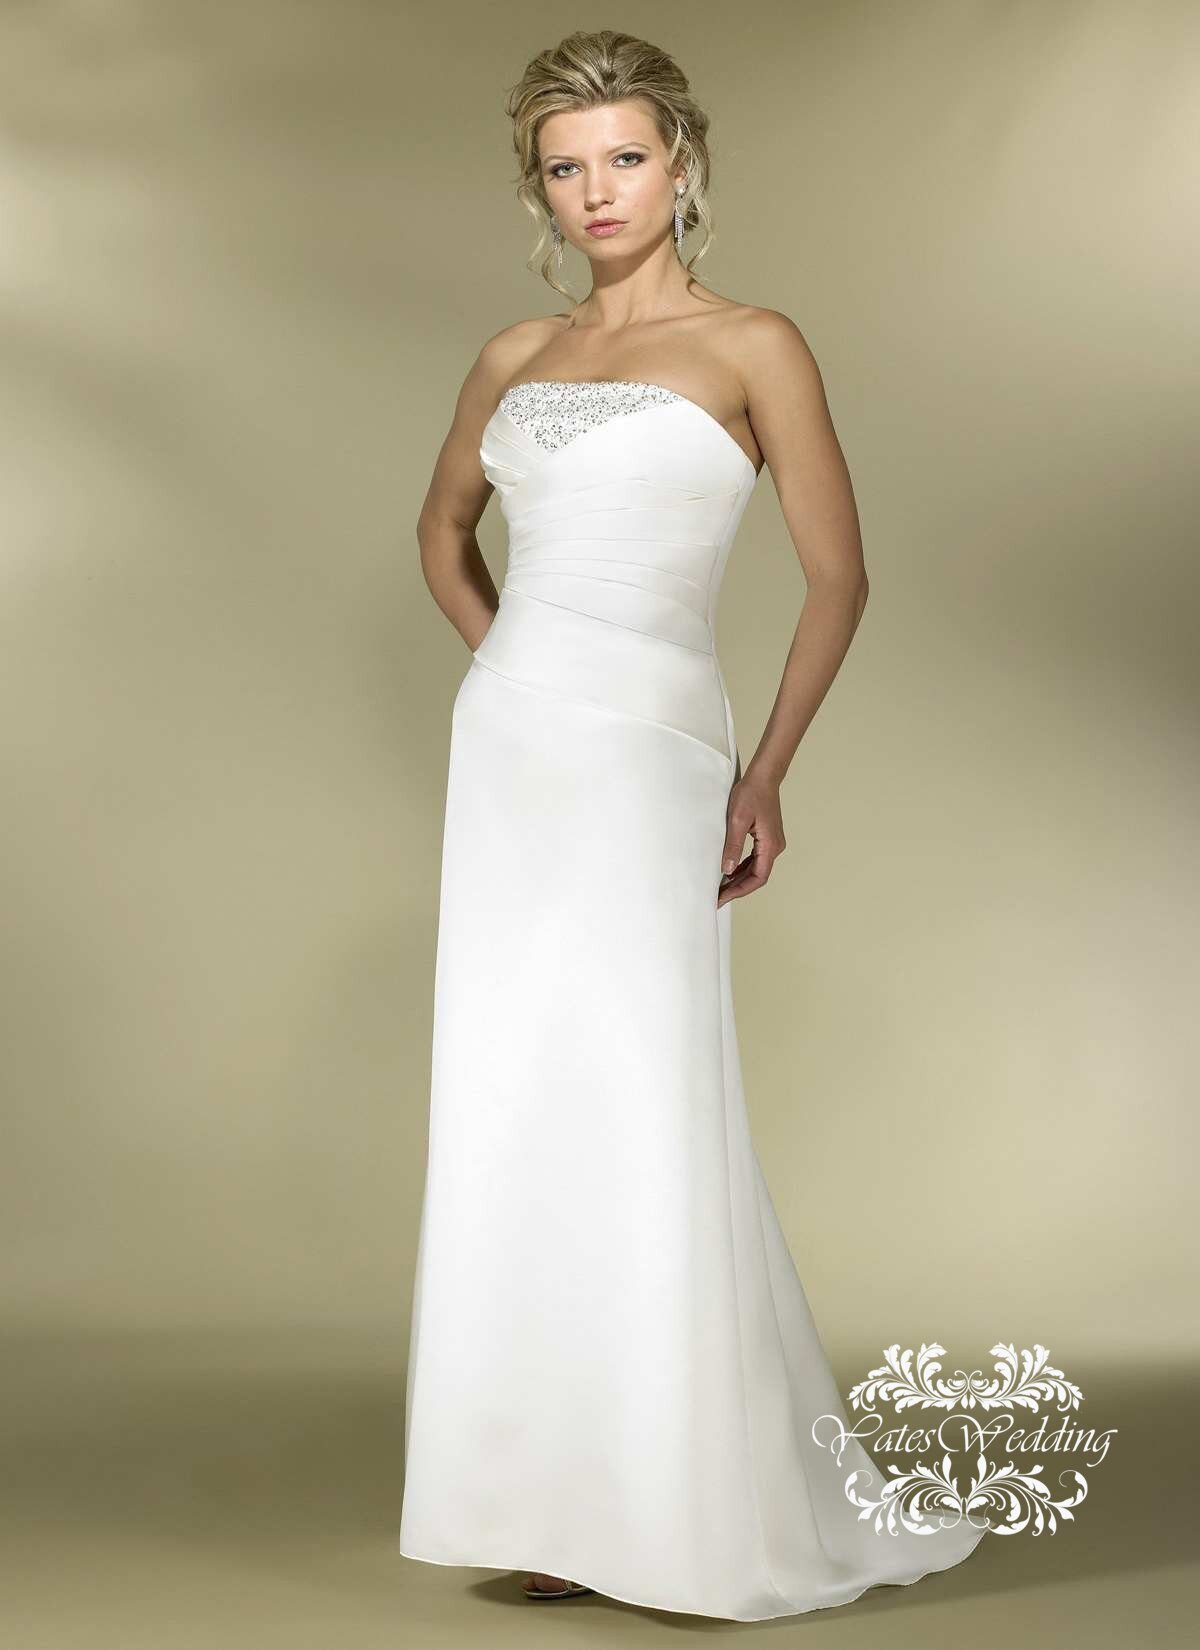 Jcpenney dresses wedding Photo - 1